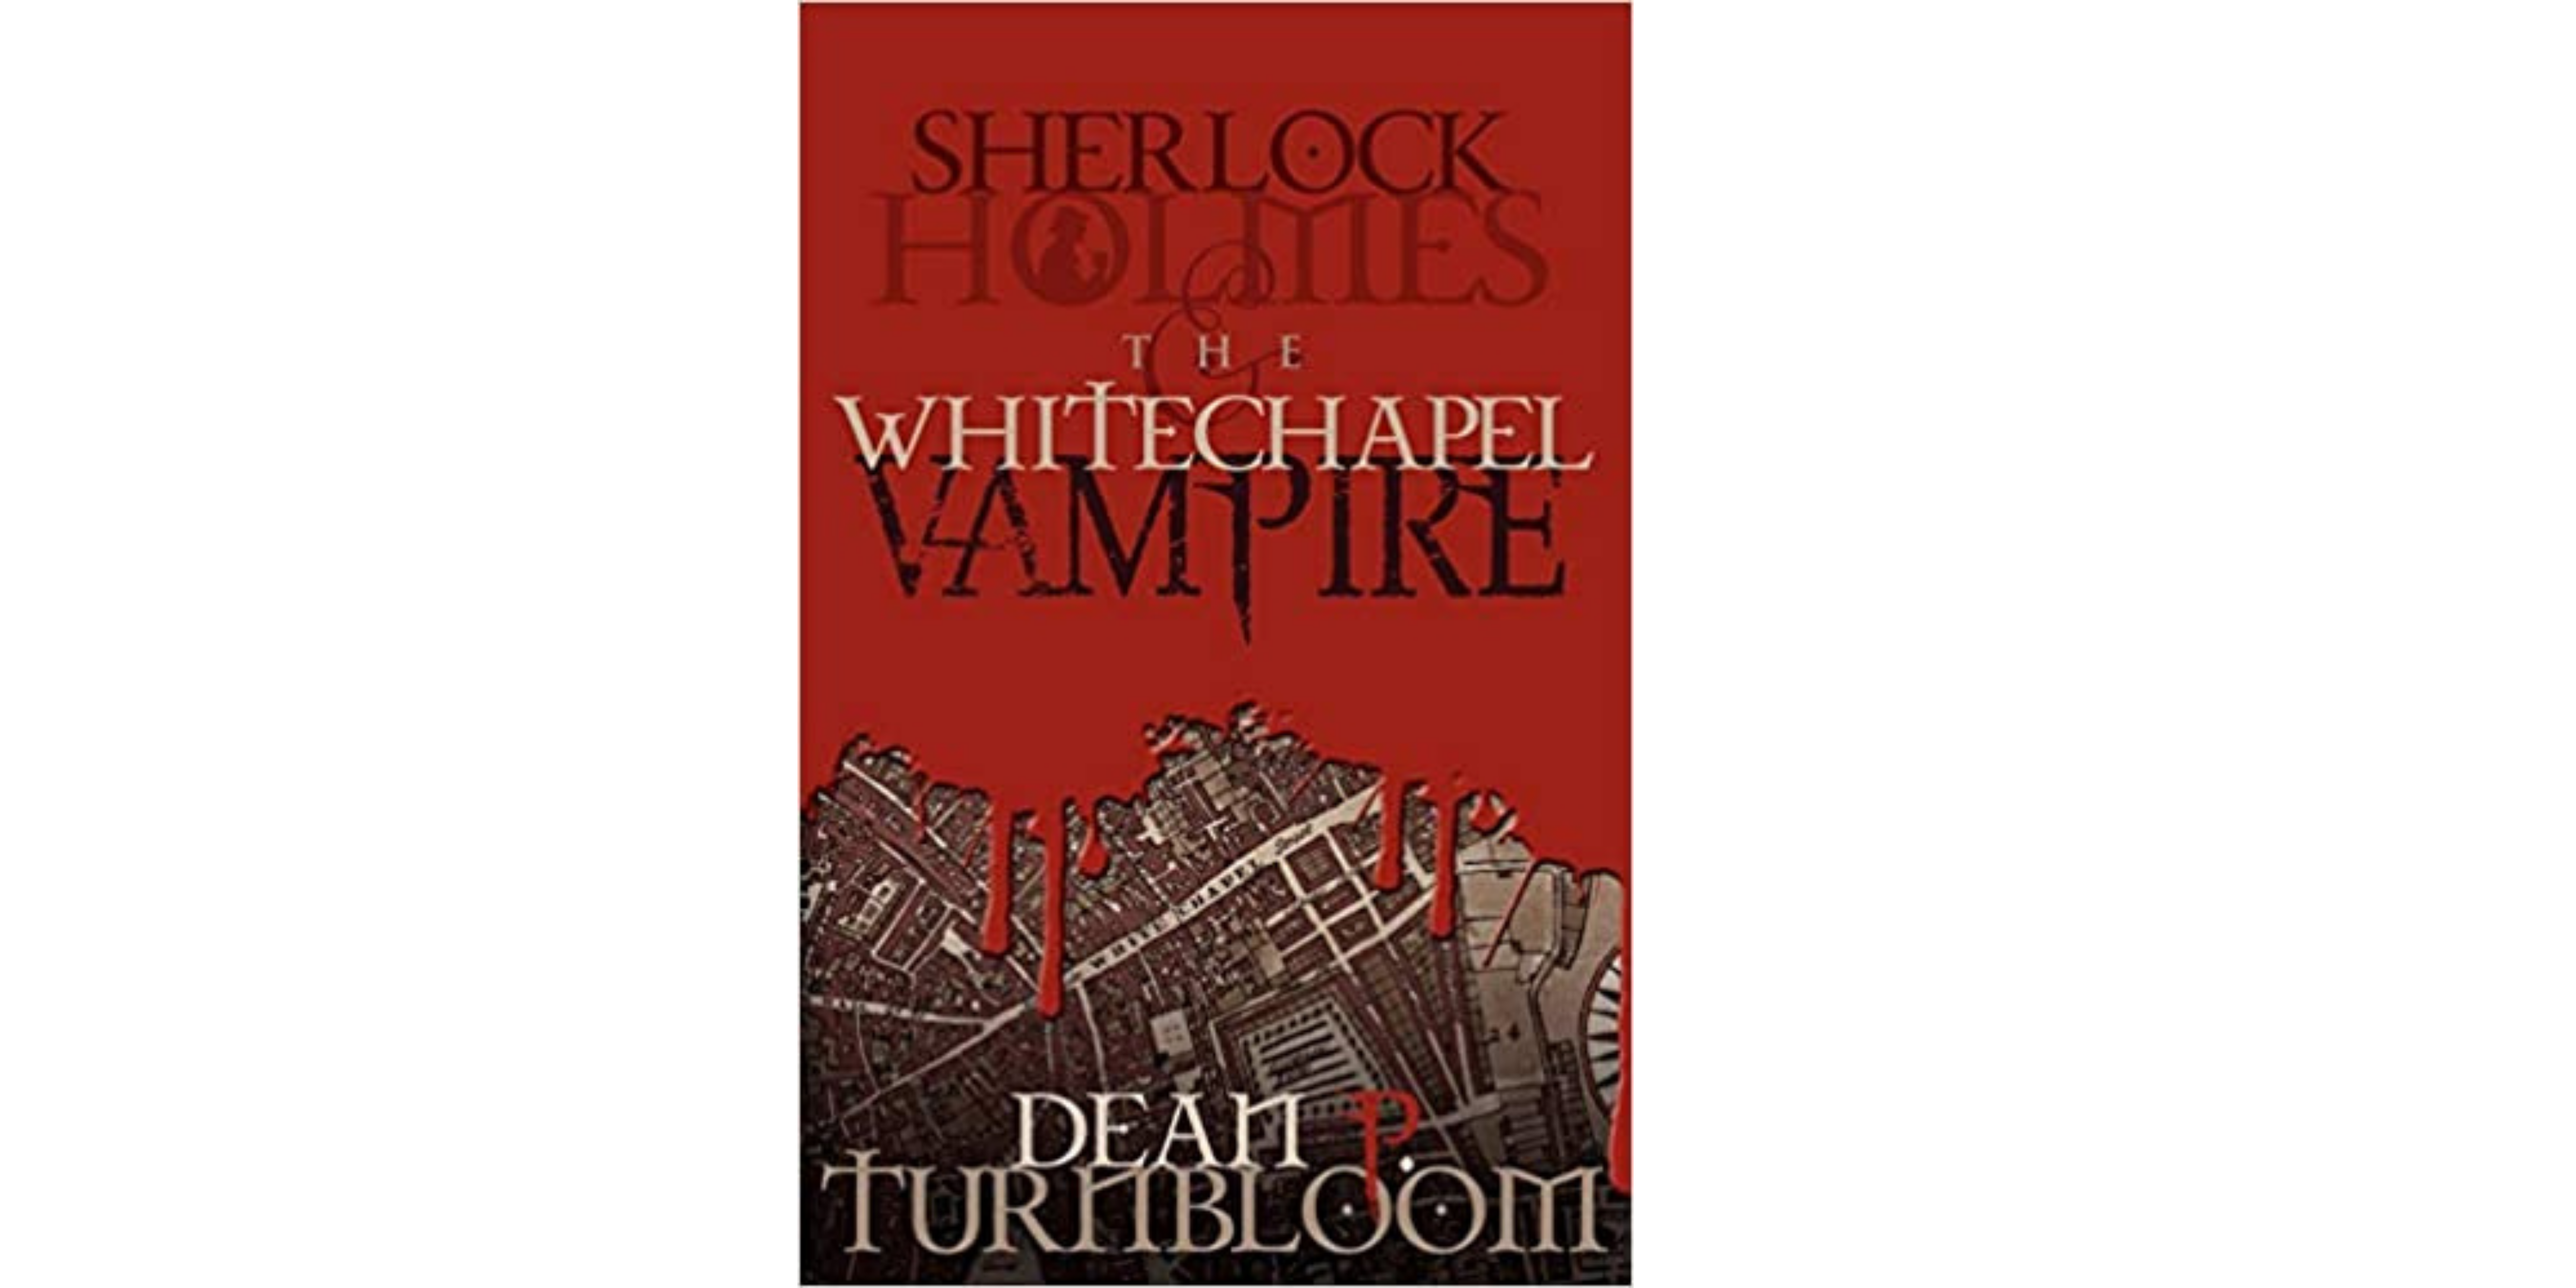 Sherlock Holmes and the Whitechapel Vampire By  Dean P. Turnbloom